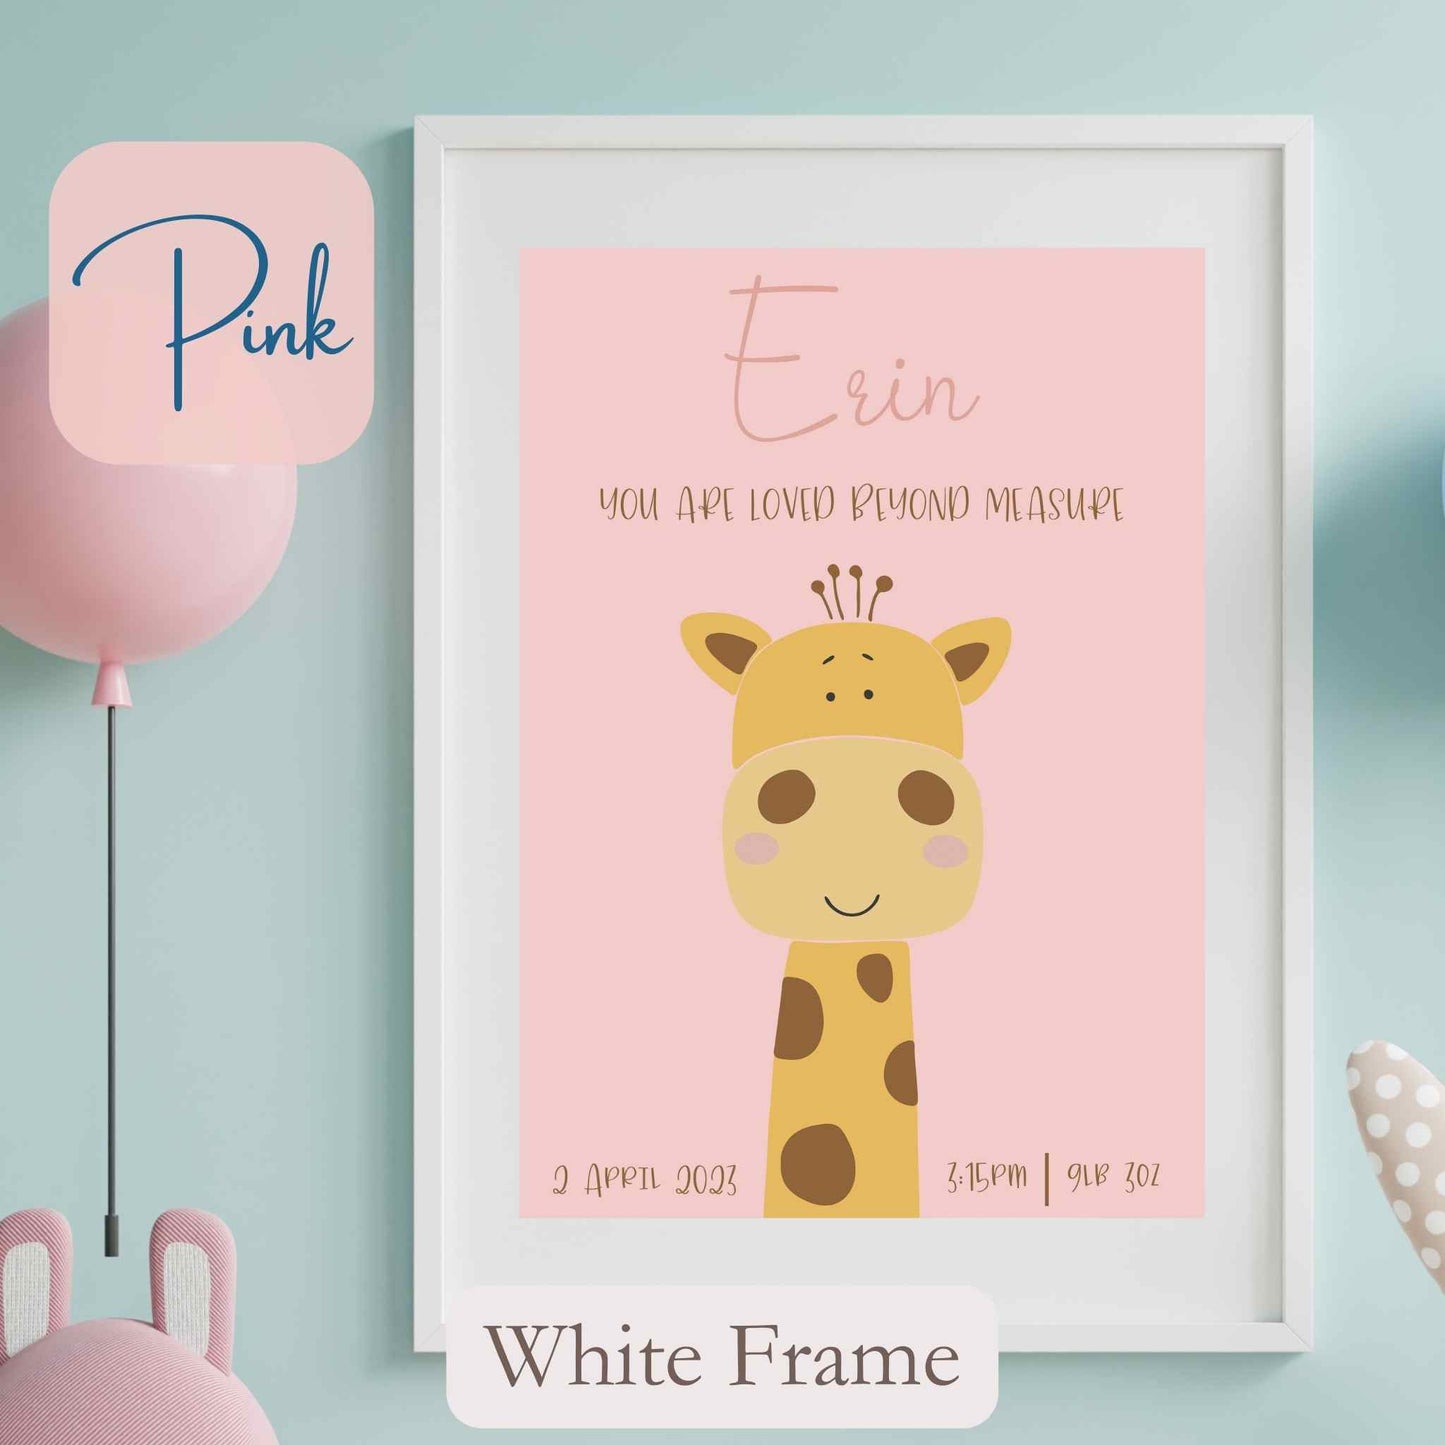 Personalised Framed Print with cute Giraffe, on pink coloured background with child’s name, and wording under name. White Frame.